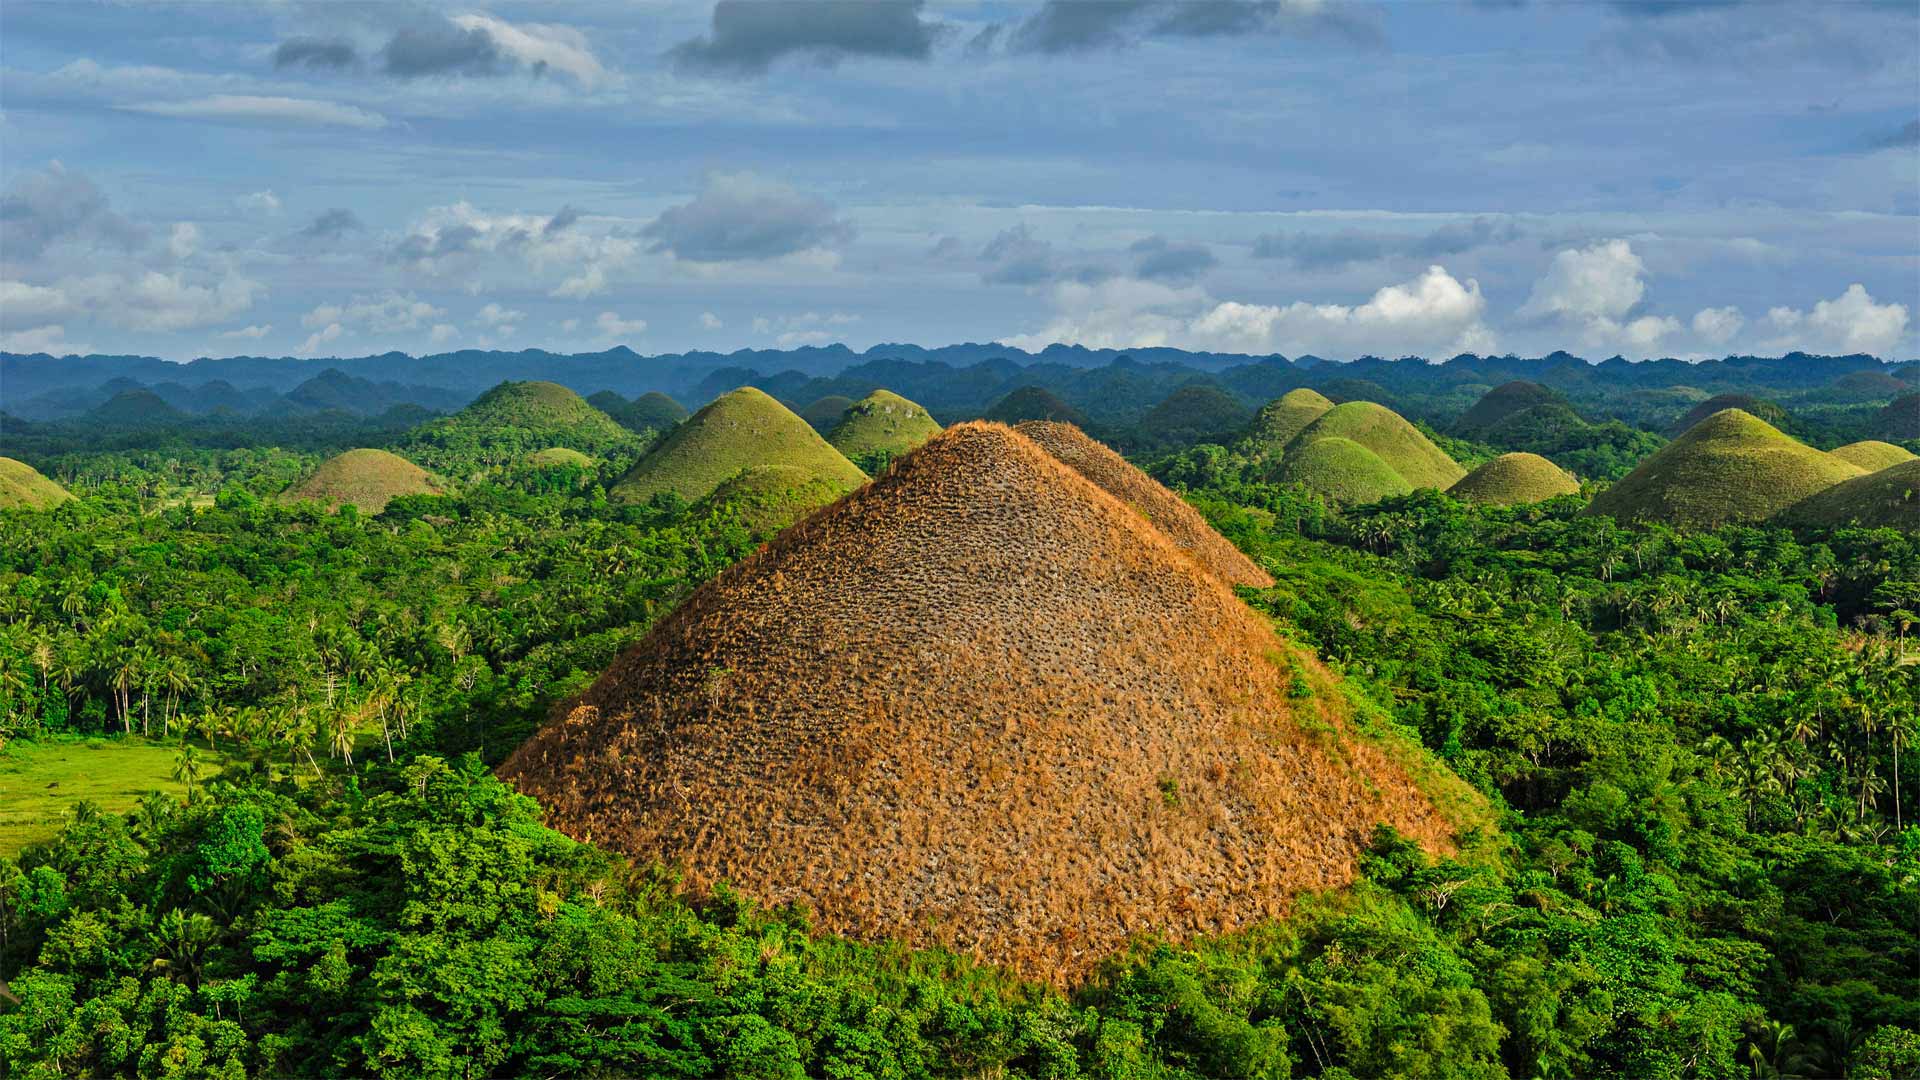 Chocolate Hills in Bohol, Philippines - Danita Delimont/Offset by Shutterstock)